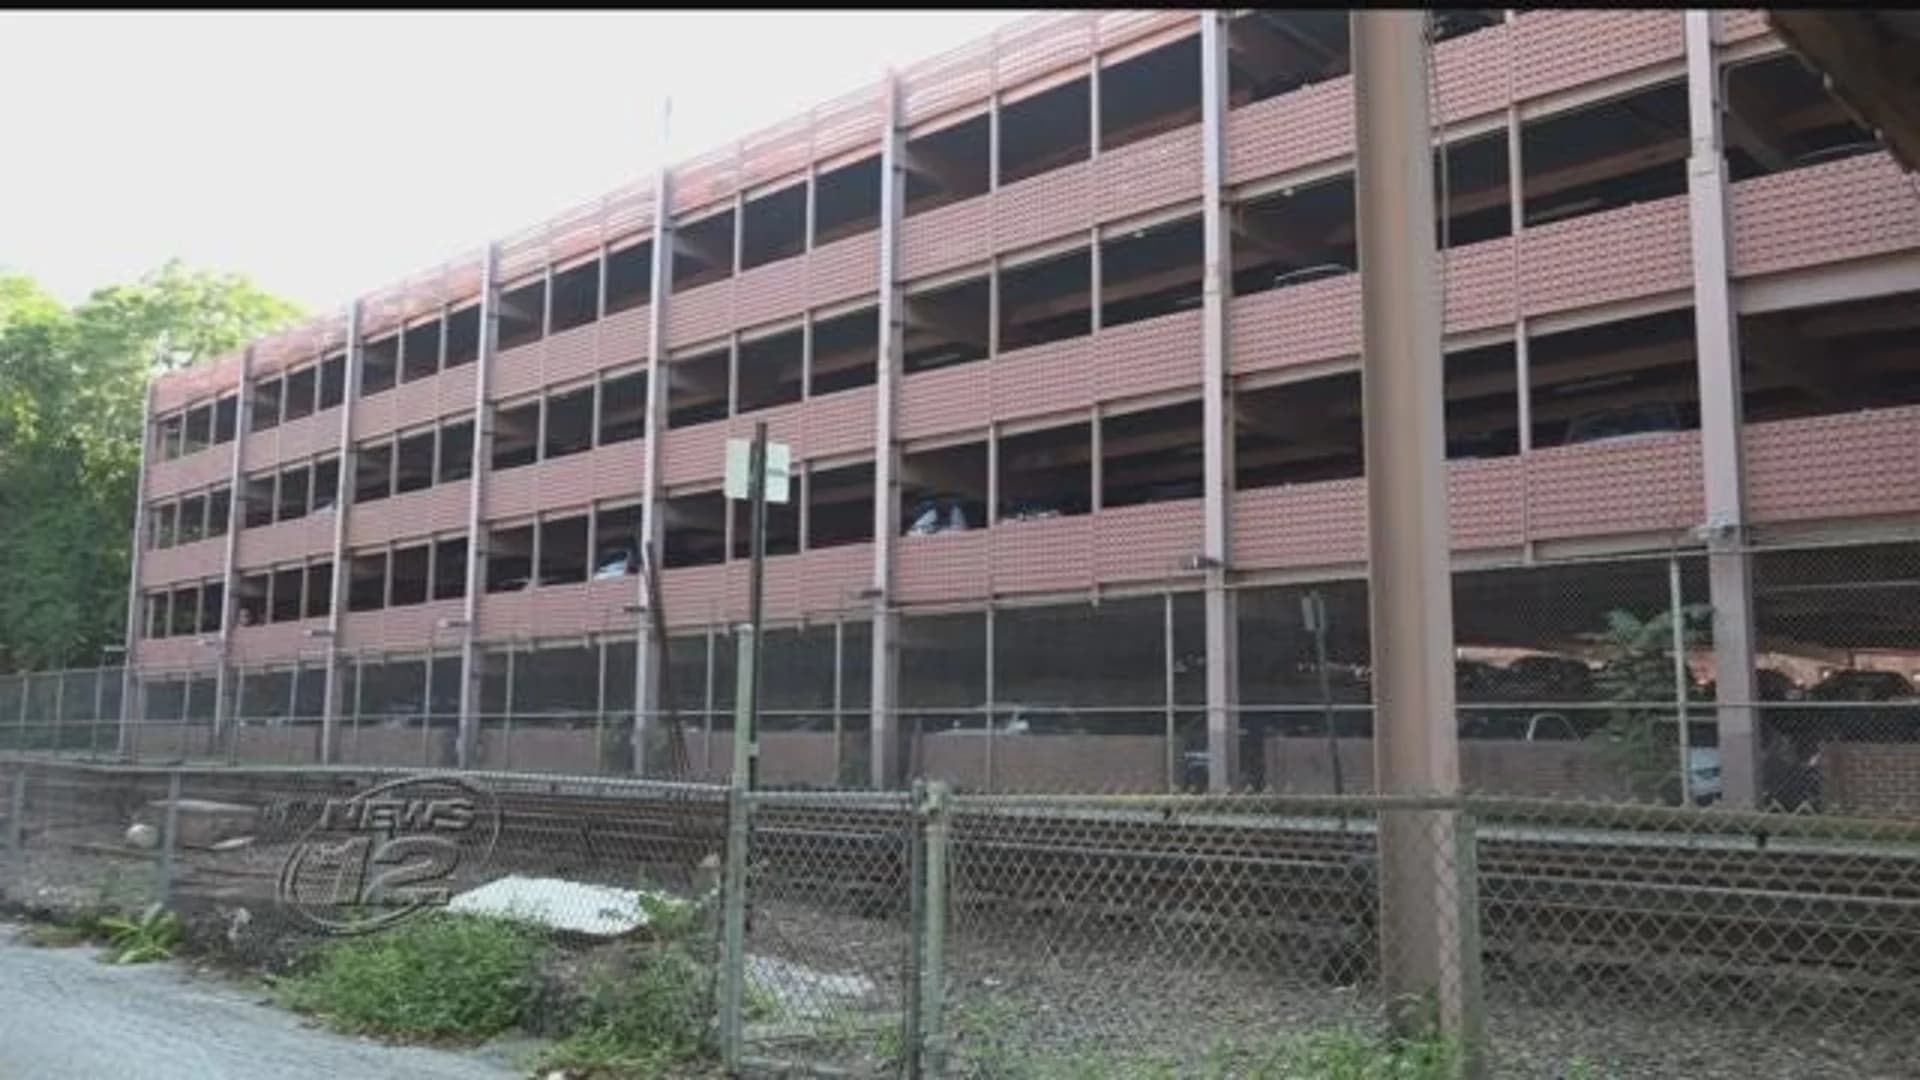 Scarsdale officials survey residents on parking garage replacement